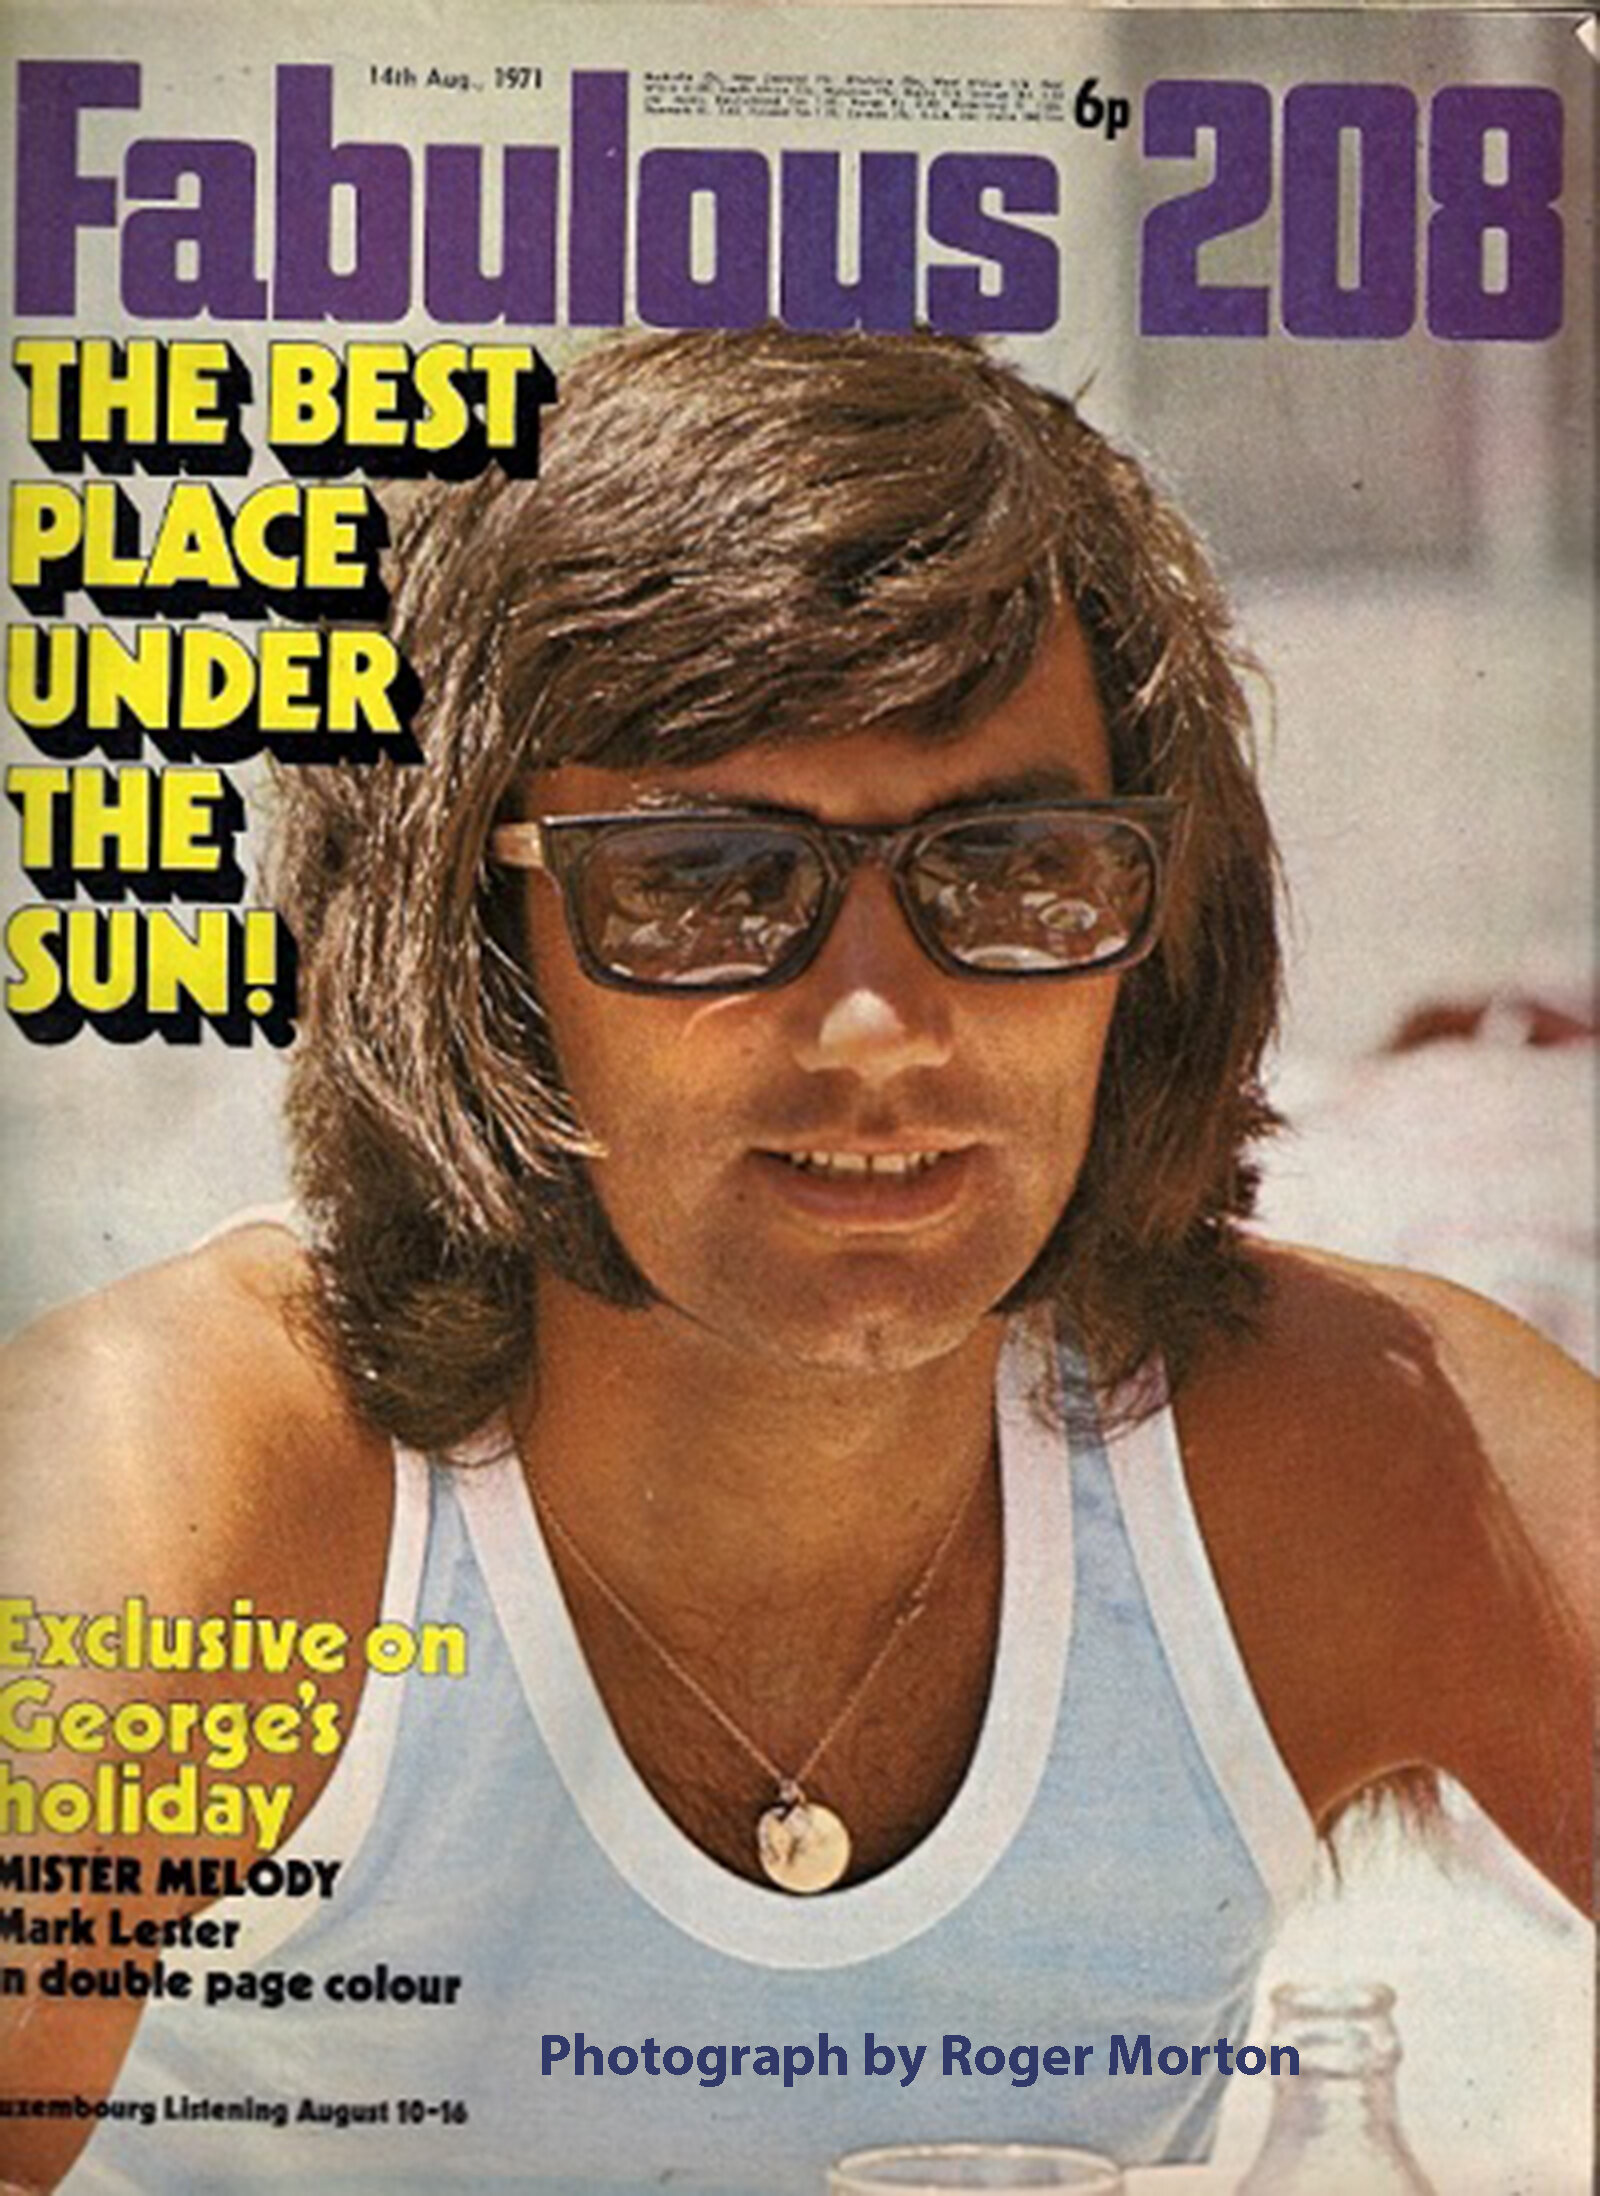 George Best in Fabulous 208 cover.